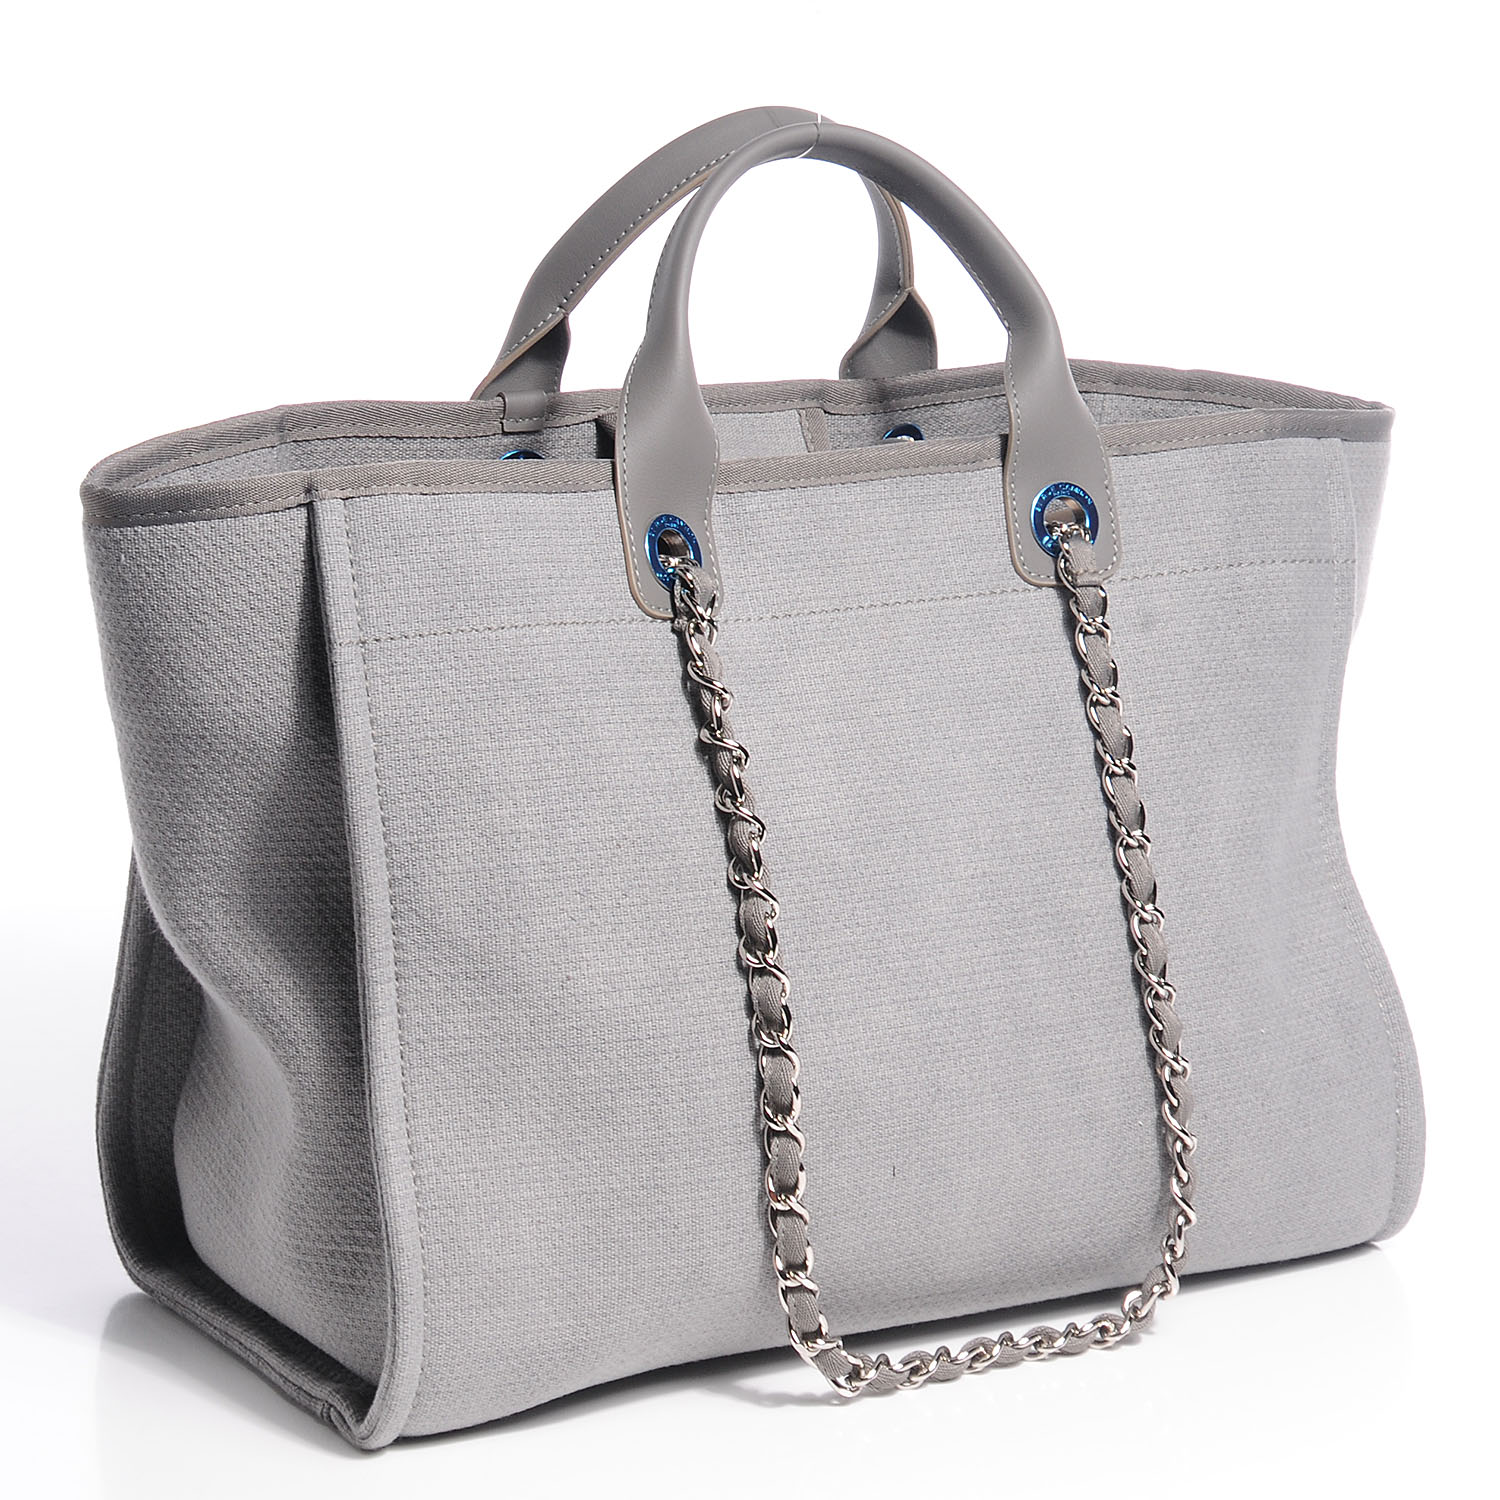 CHANEL Canvas Deauville Large Tote Grey 85485